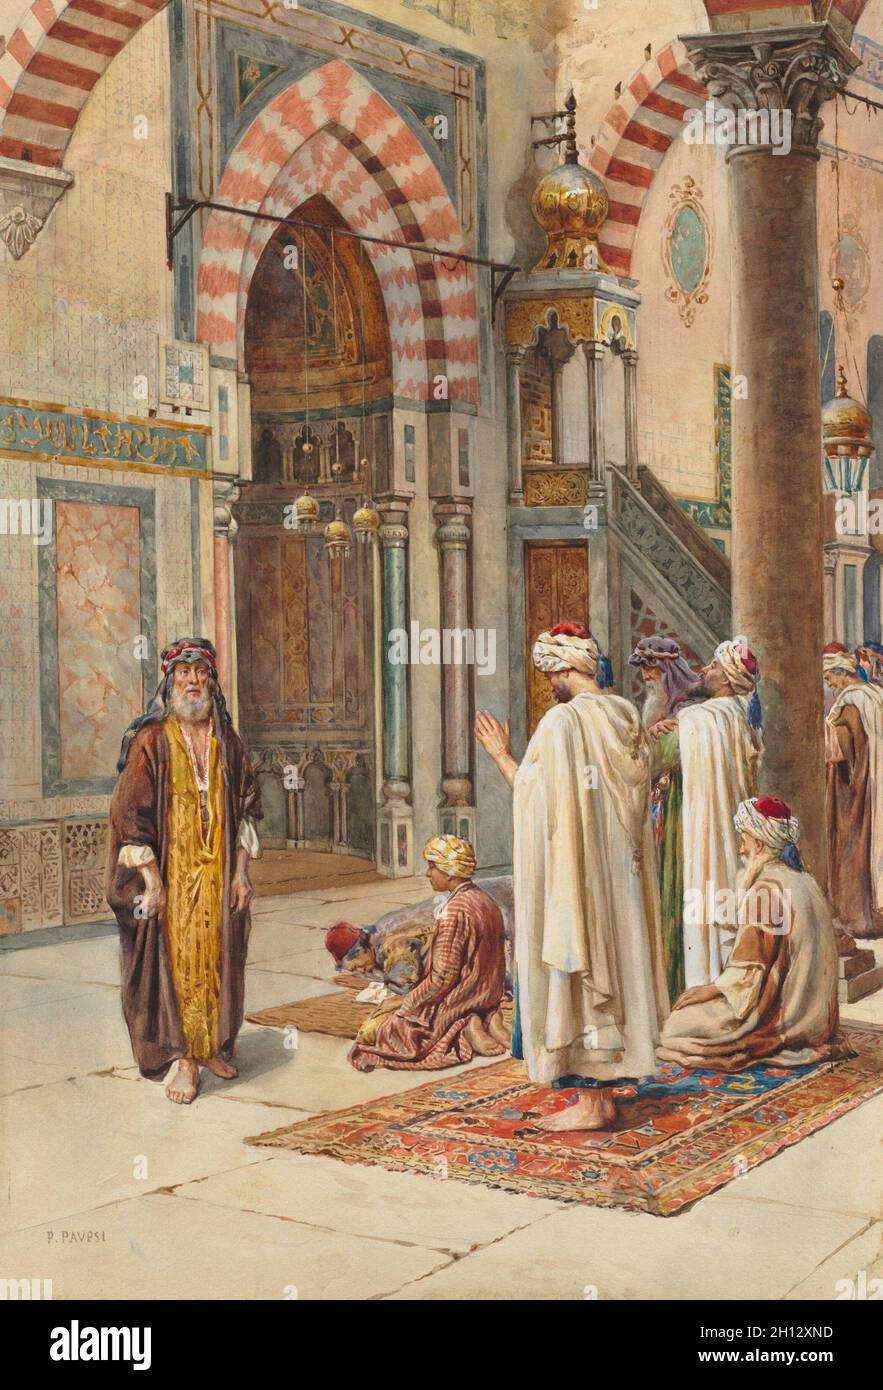 Moslems at Prayer, late 1800s-early 1900s. P. Pavesi (Italian). Watercolor on heavy board; unframed: 46.7 x 36.9 cm (18 3/8 x 14 1/2 in.). Stock Photo